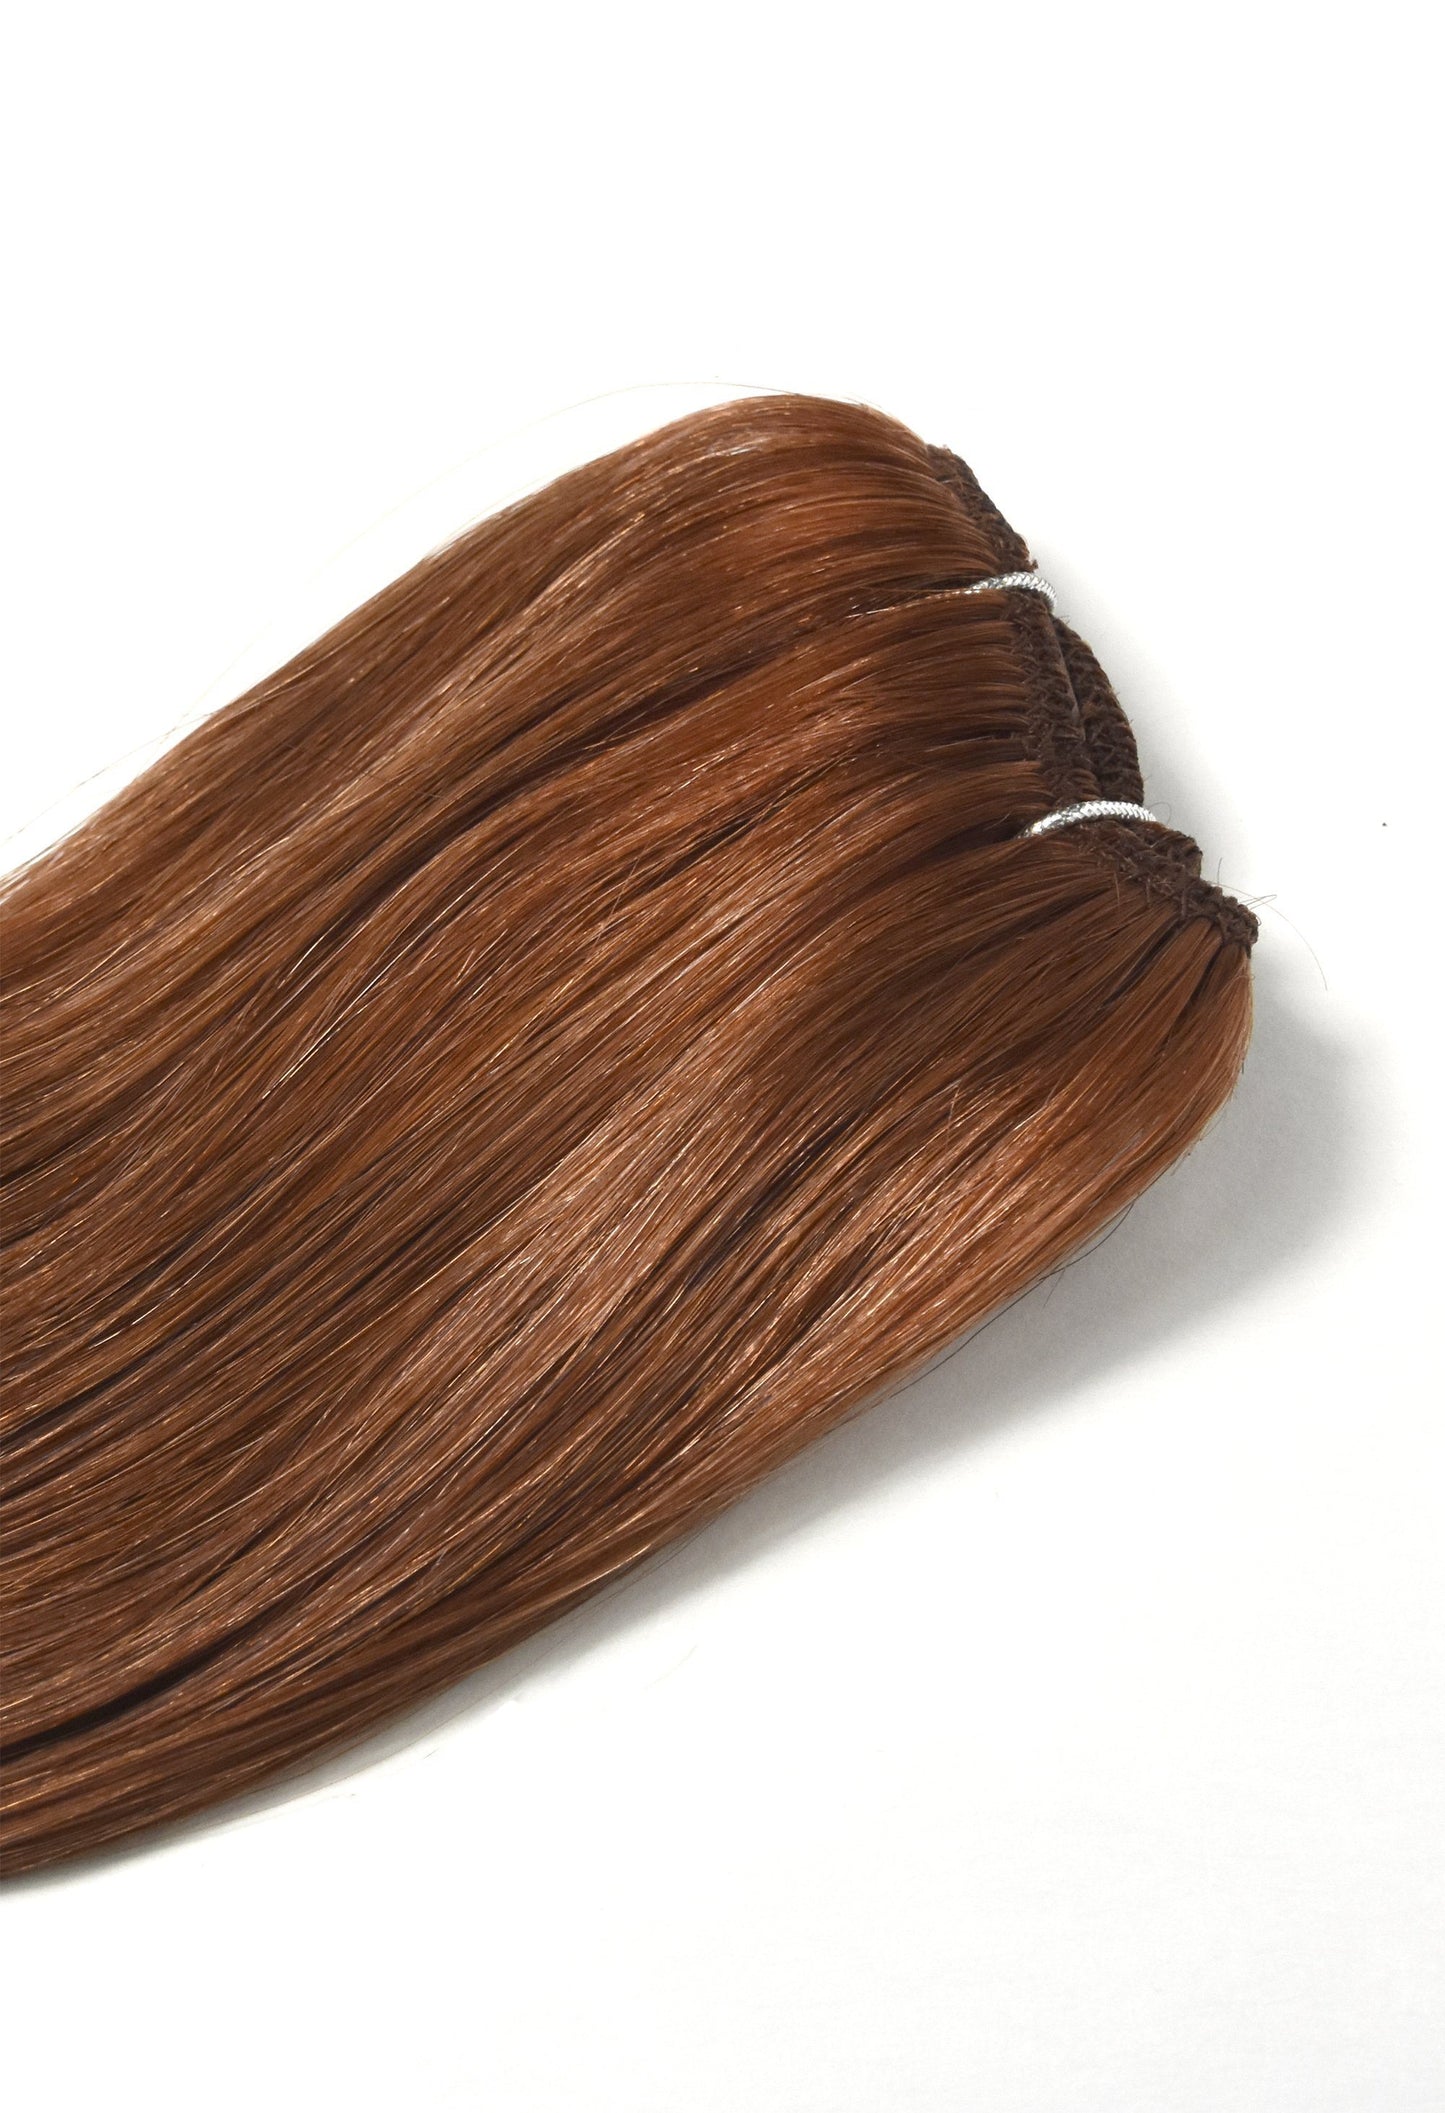 hair pieces - one piece clip in hair extensions